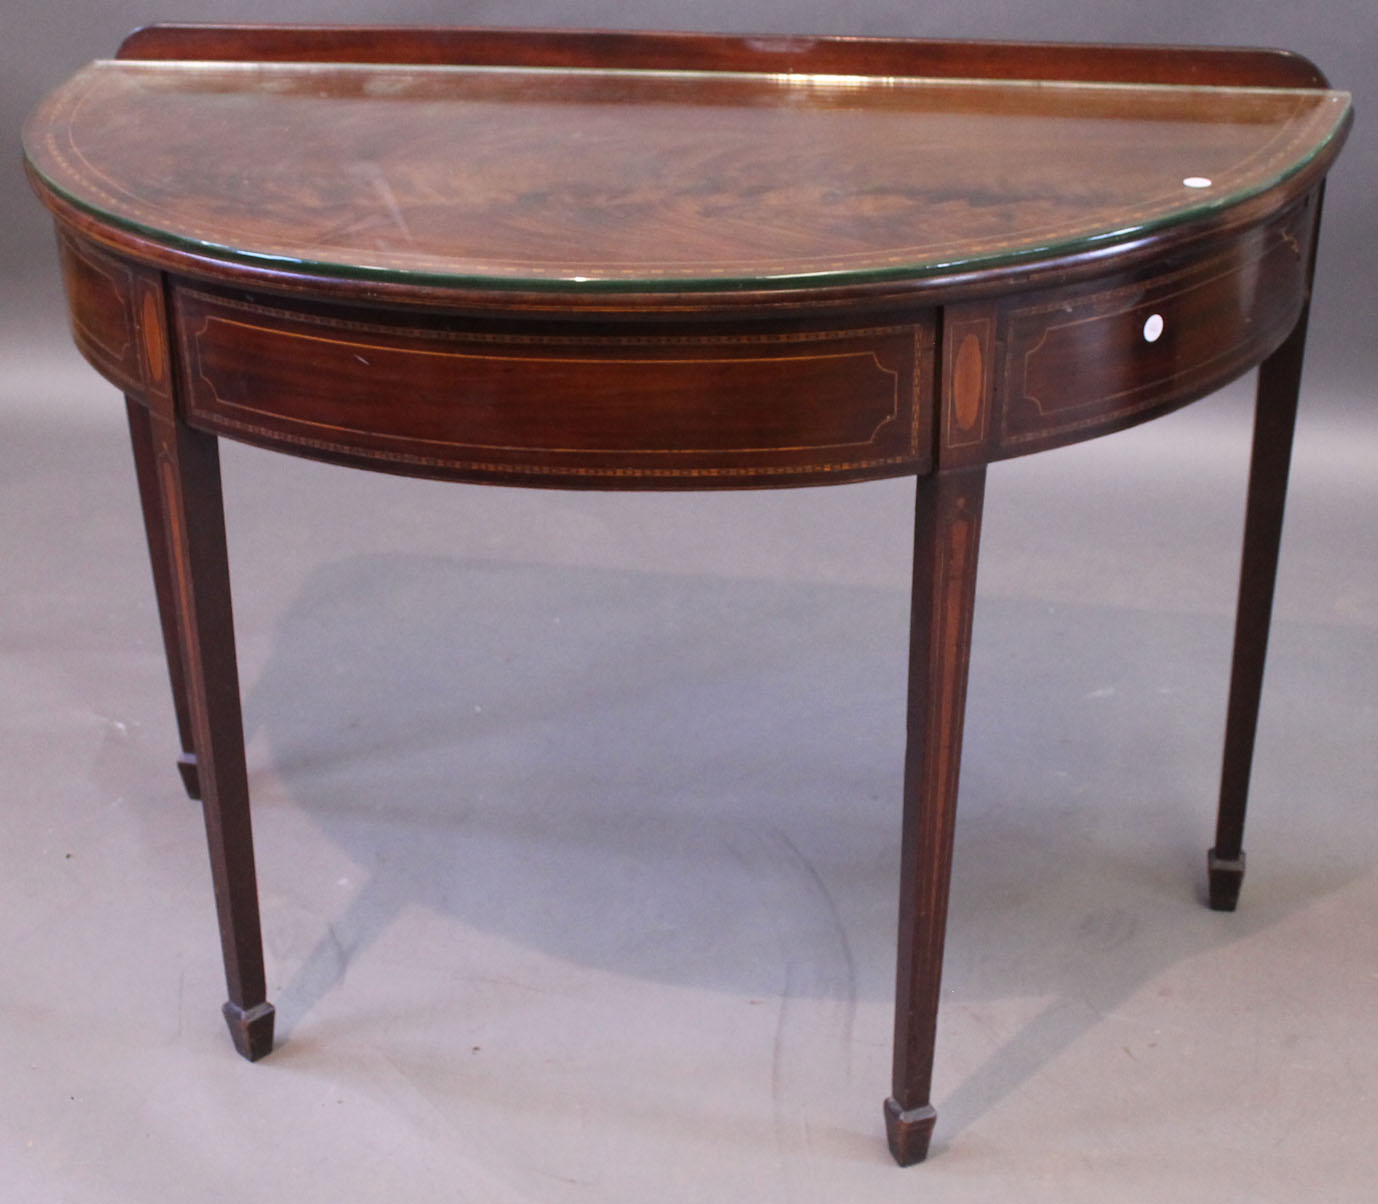 A 19th century inlaid mahogany semi circular side table, decorated with checkered banding, oval